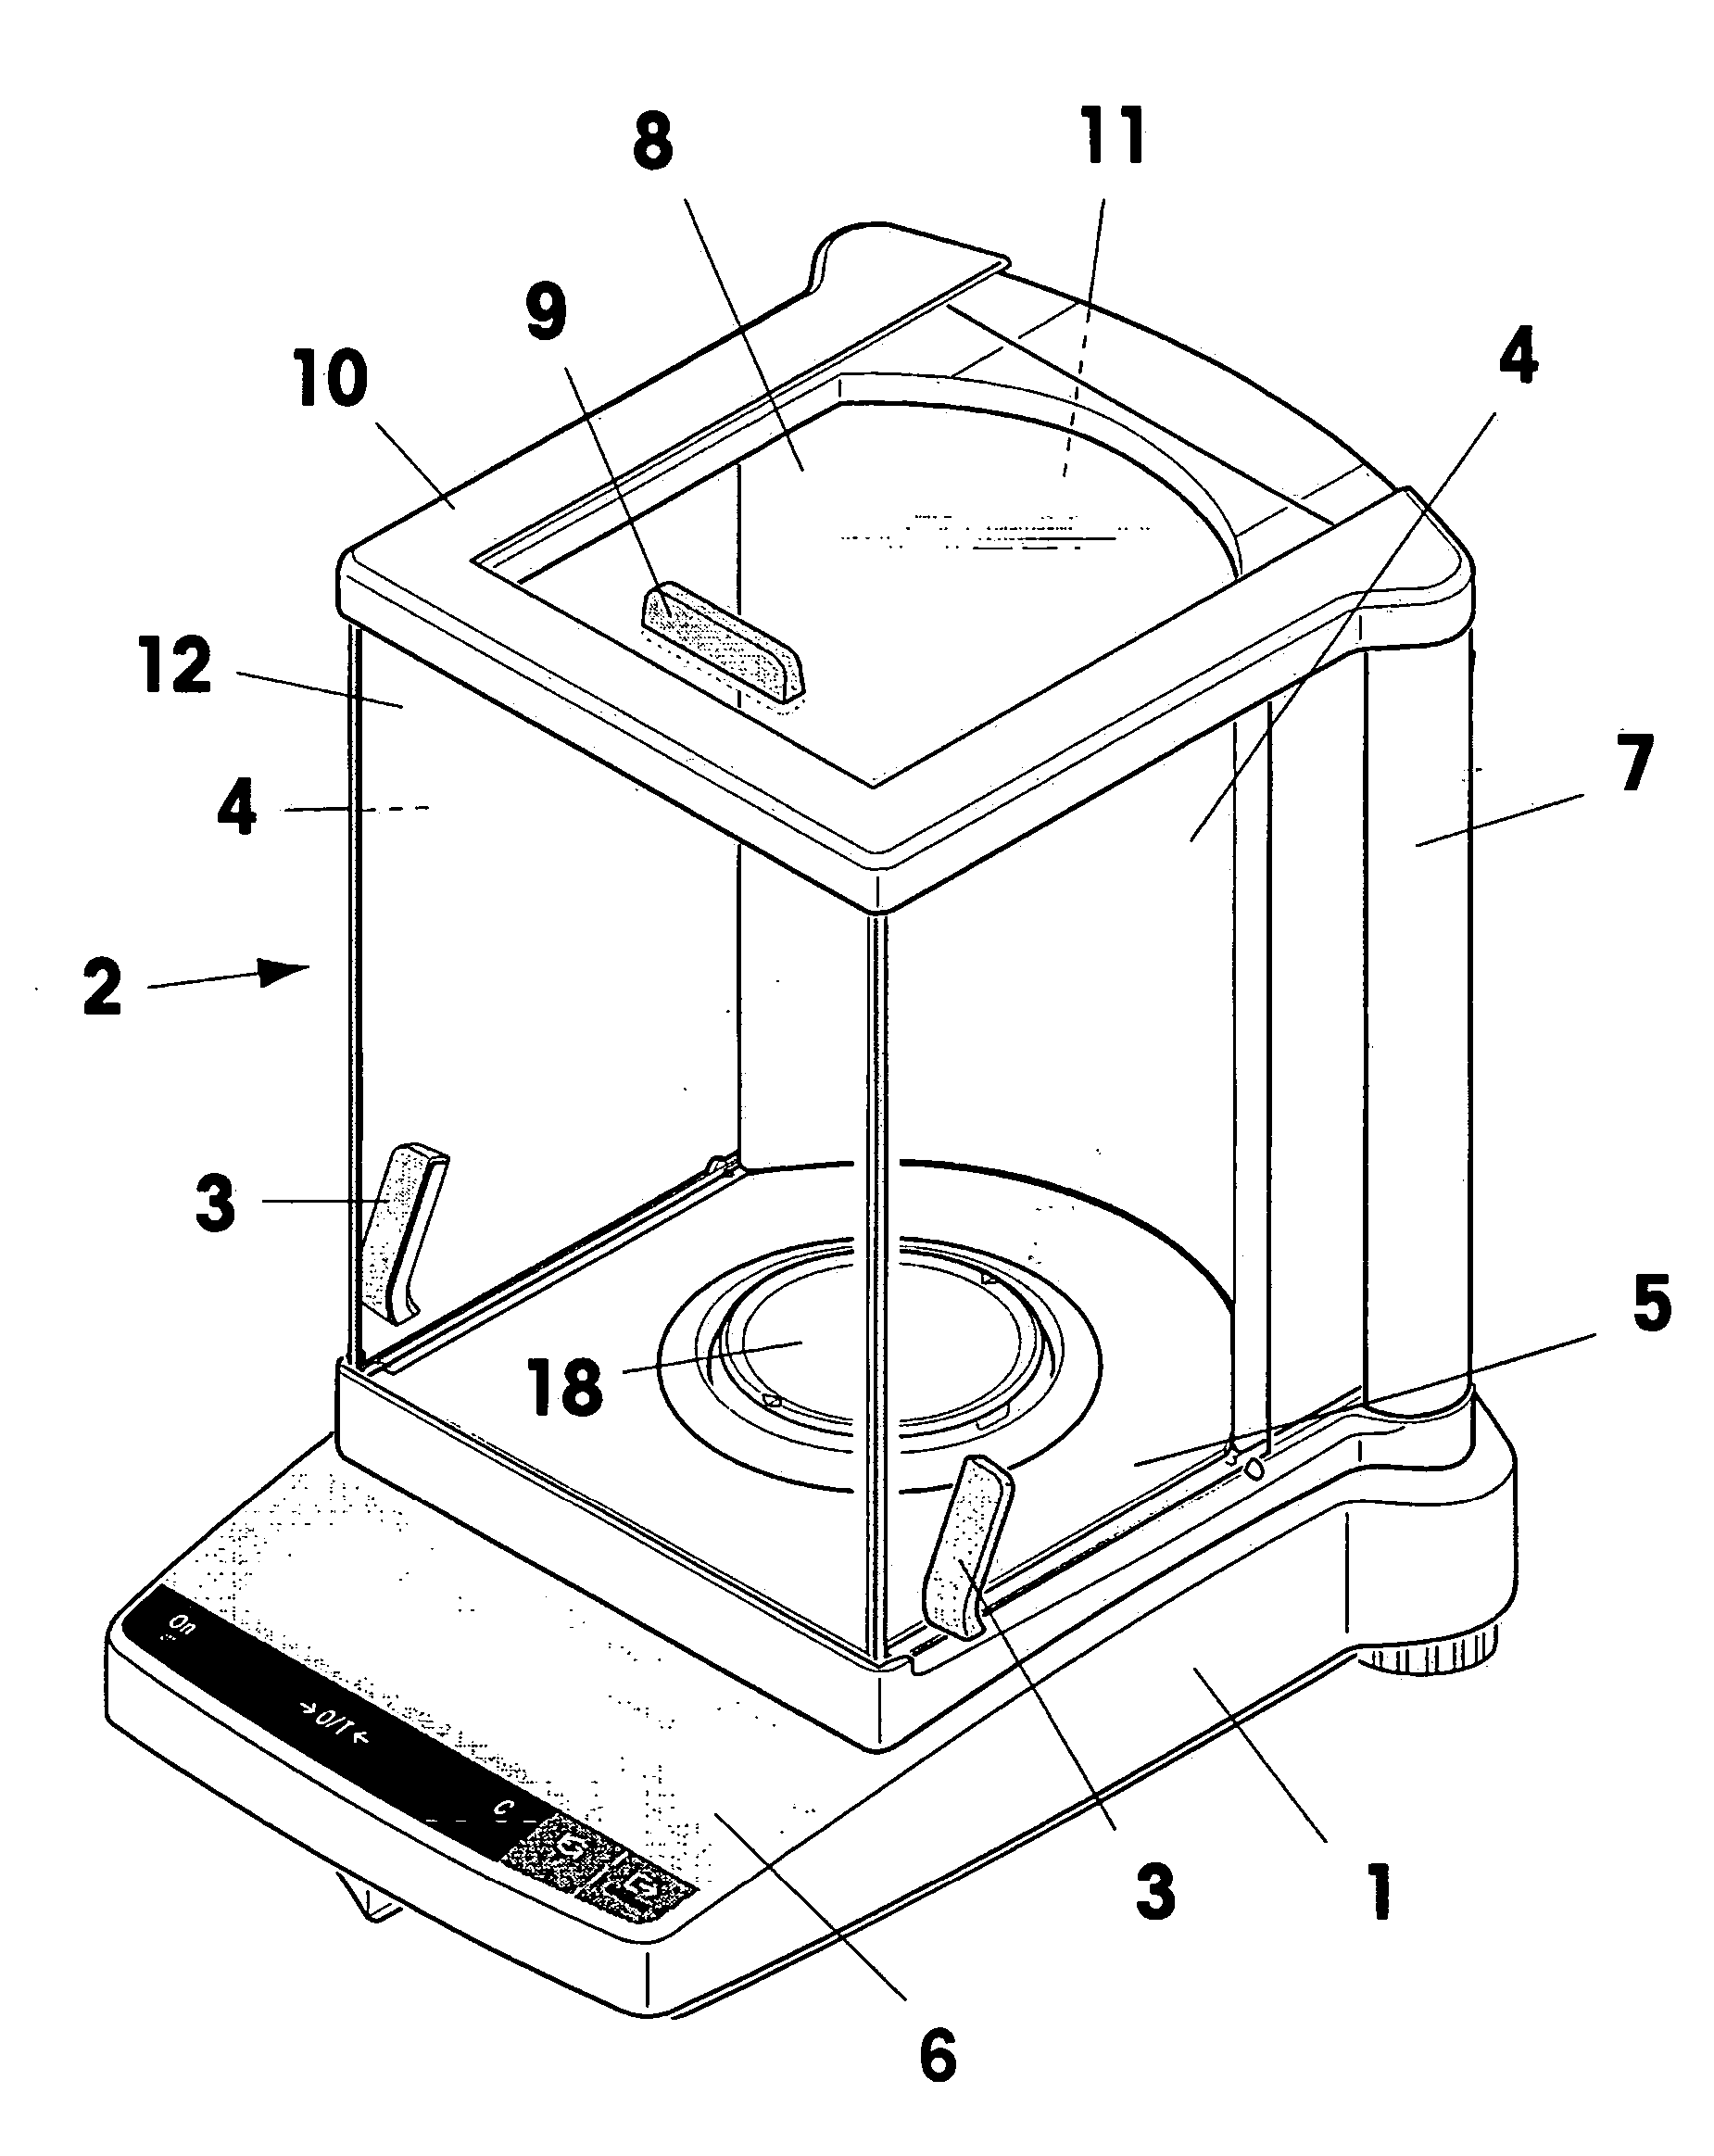 Device for monitoring the operating conditions of a balance